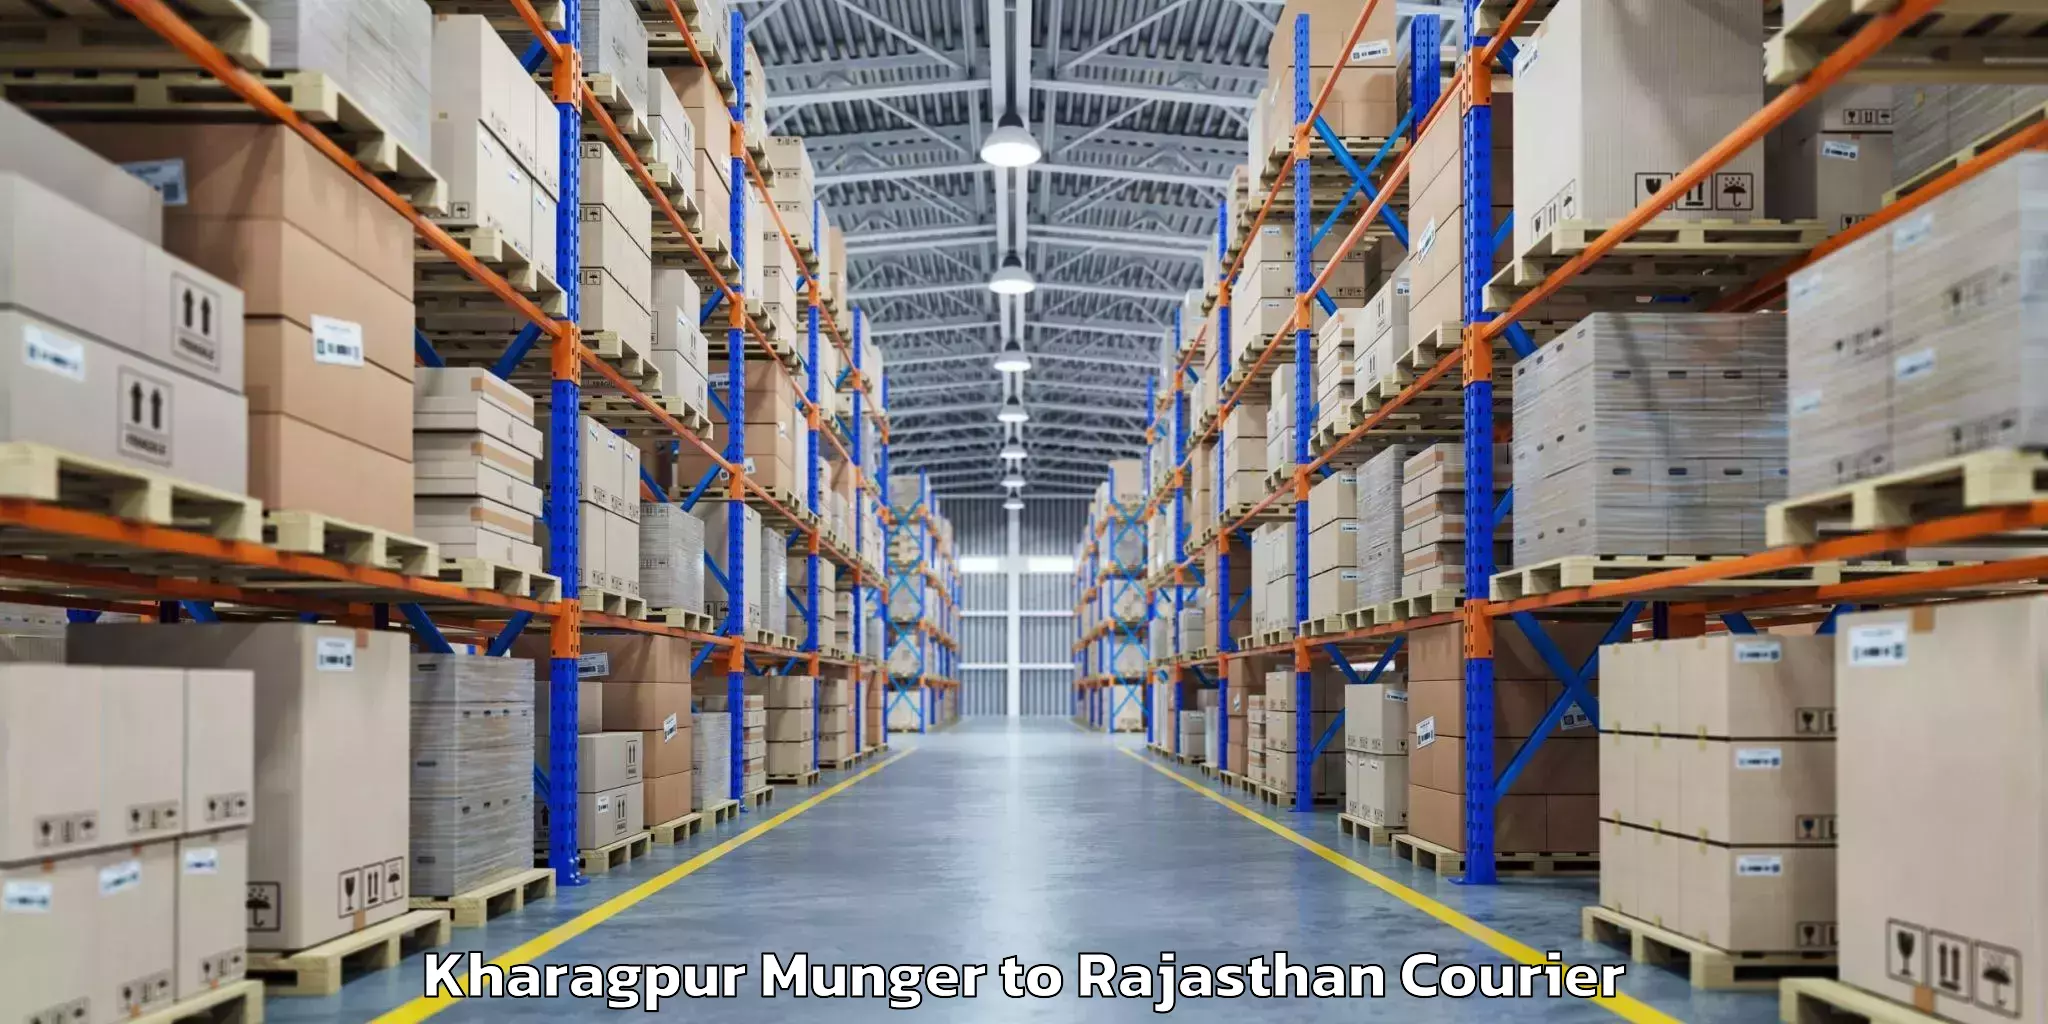 Baggage delivery technology Kharagpur Munger to Weir